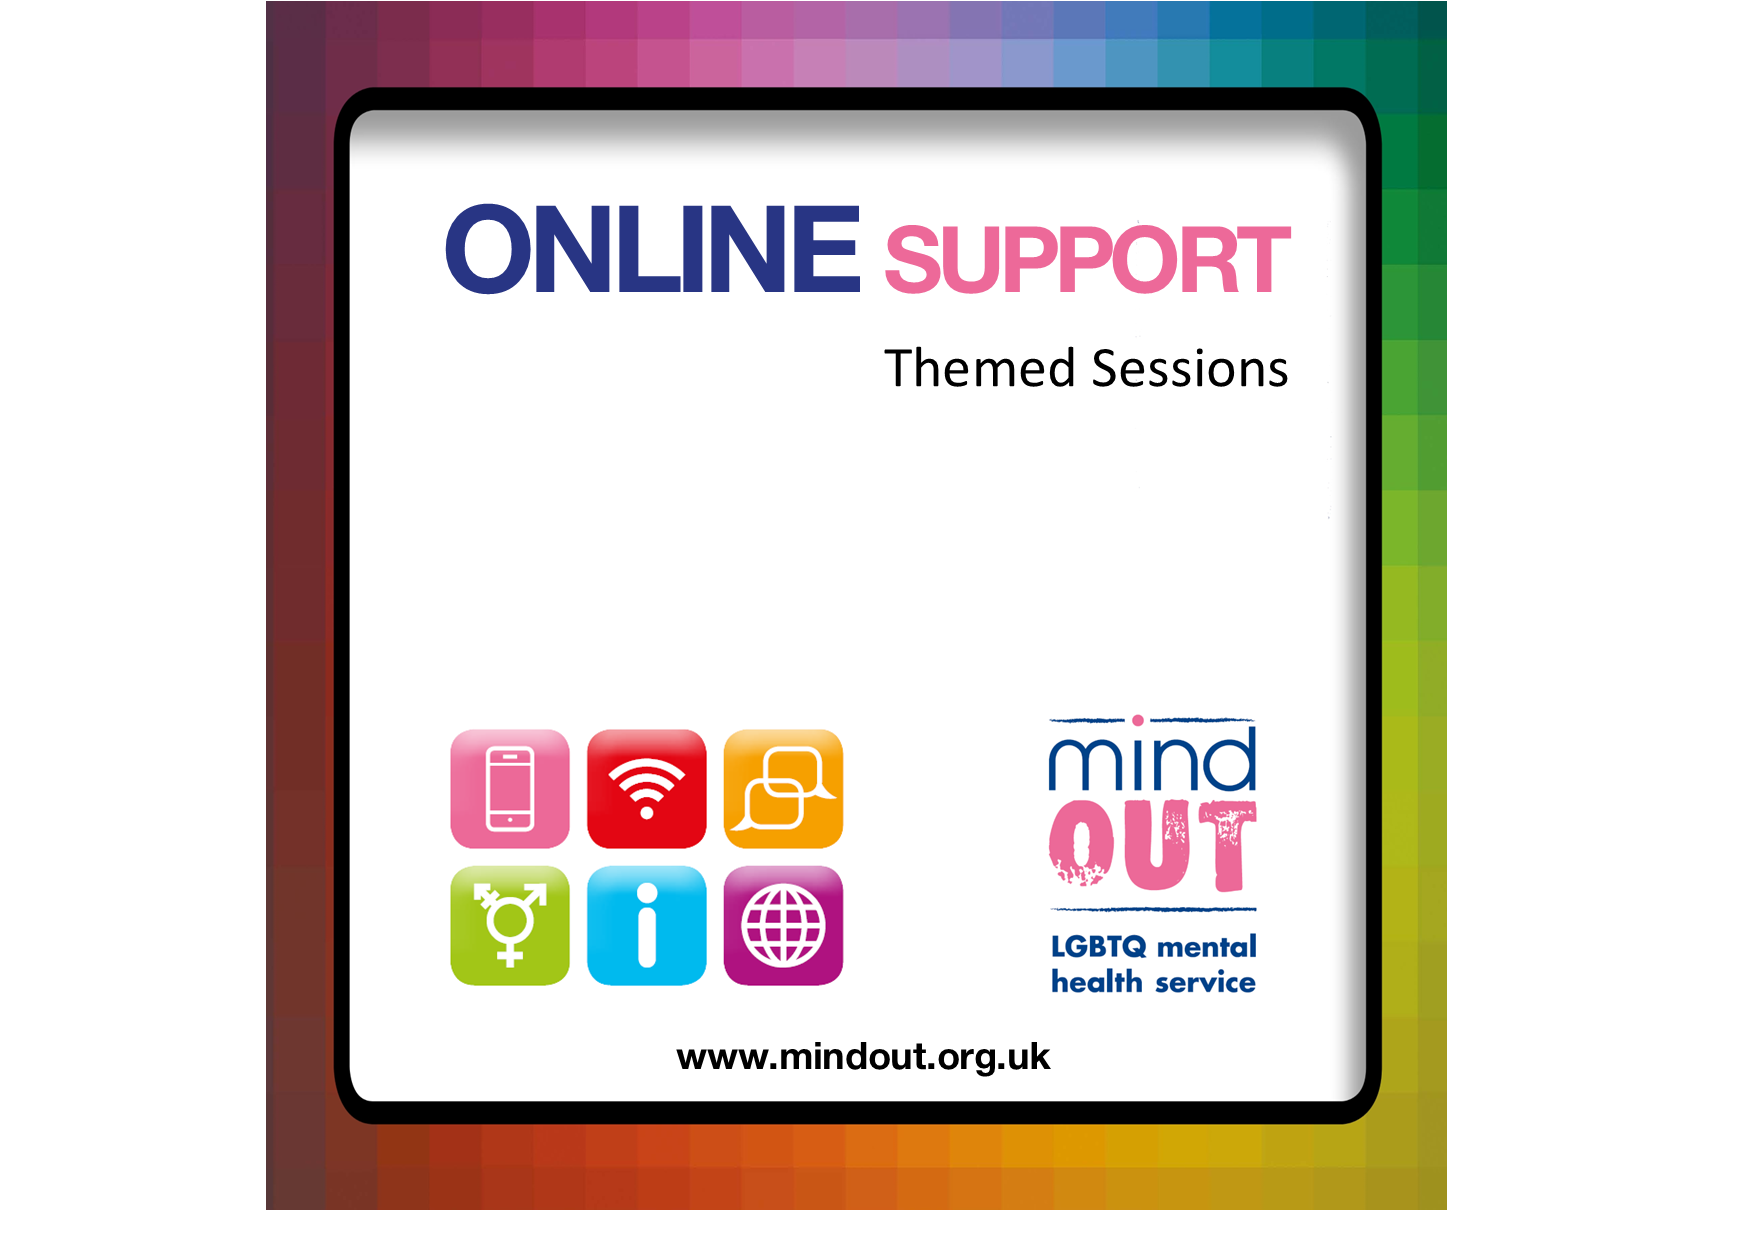 online support themed sessions with six colourful symbols and the mindout logo and the mindout logo